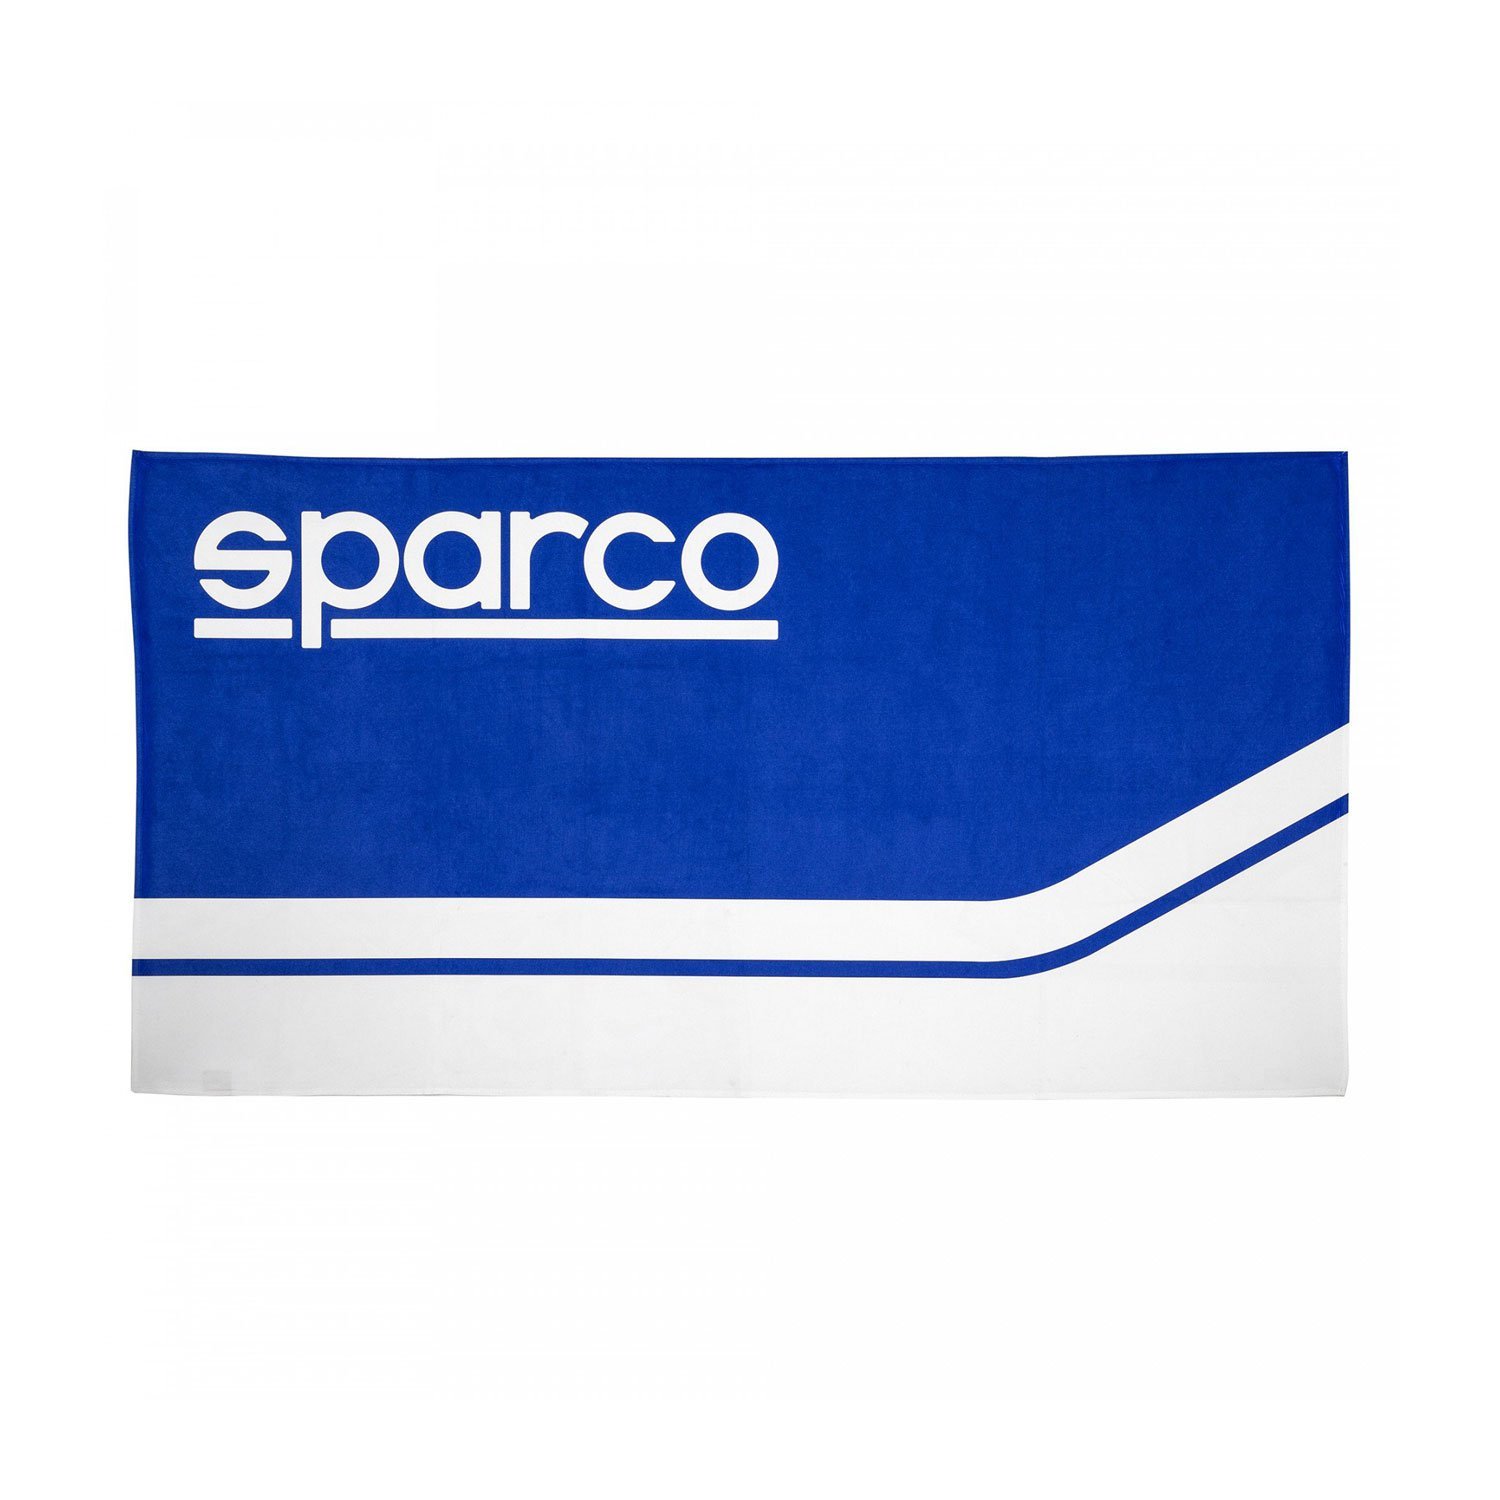 Sparco Italy Gym Towel blue | Accessories \ Towels Shop by Team ...